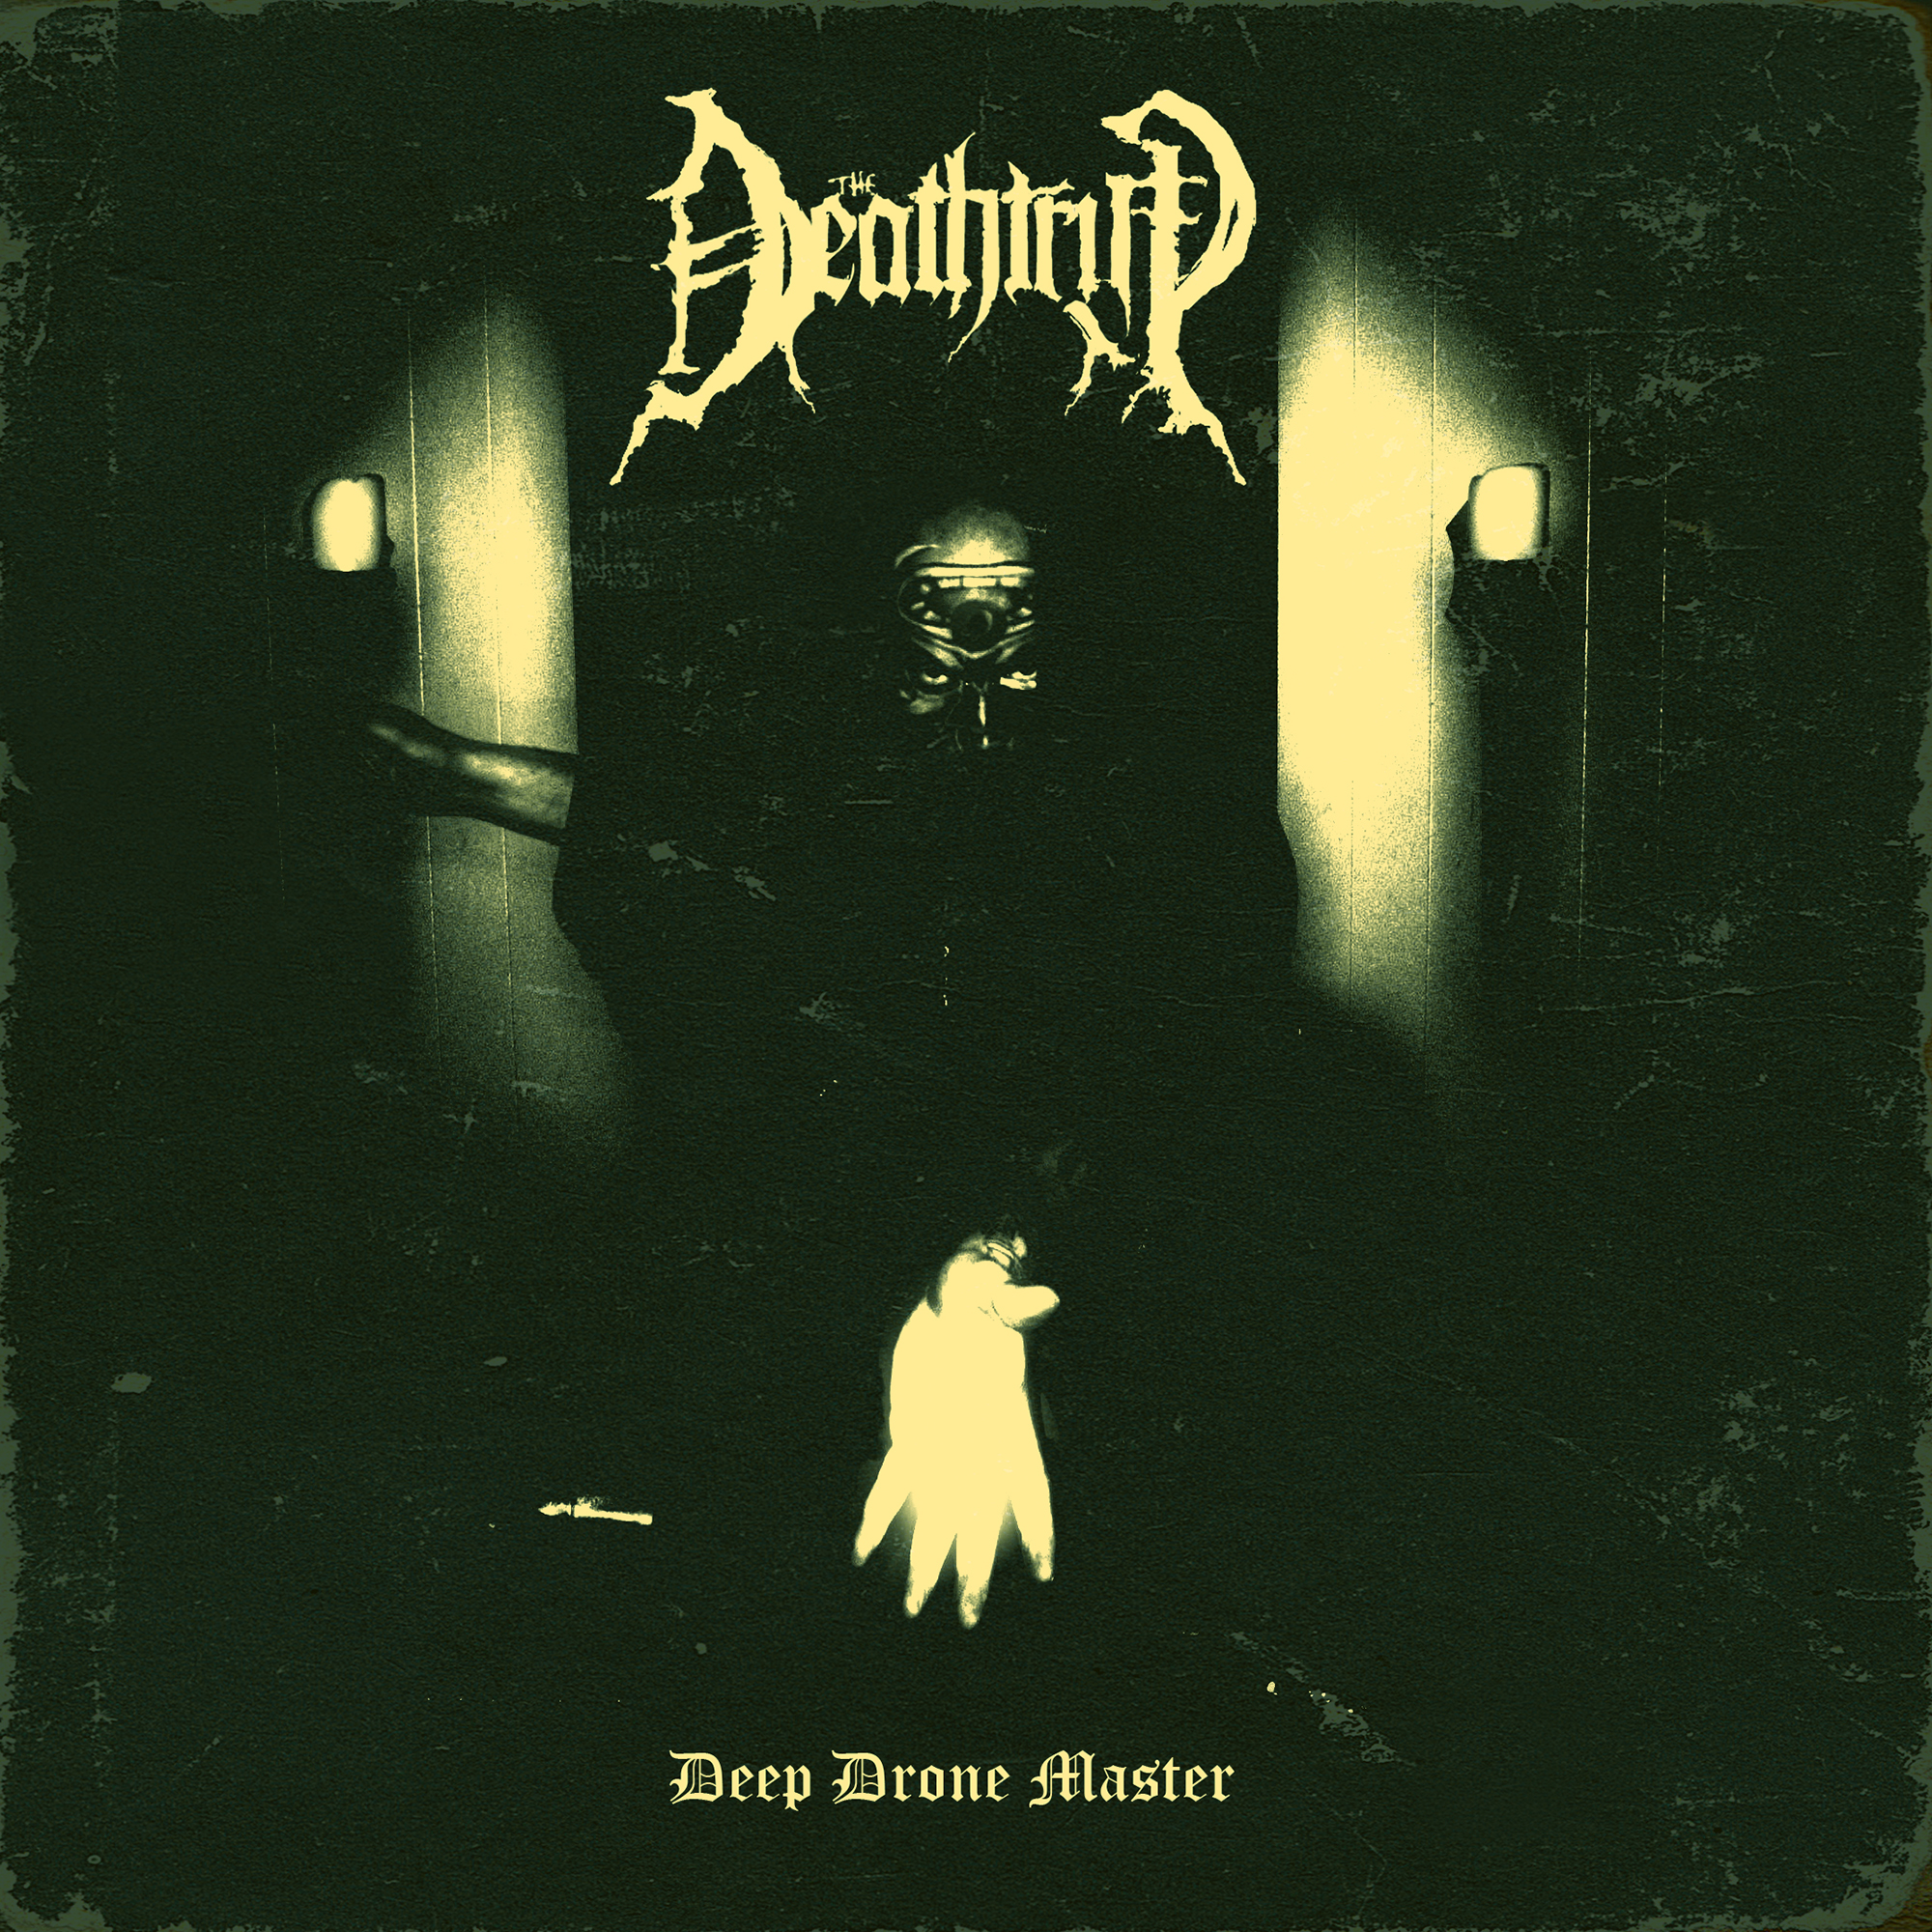 THE DEATHTRIP – DEEP DRONE MASTER